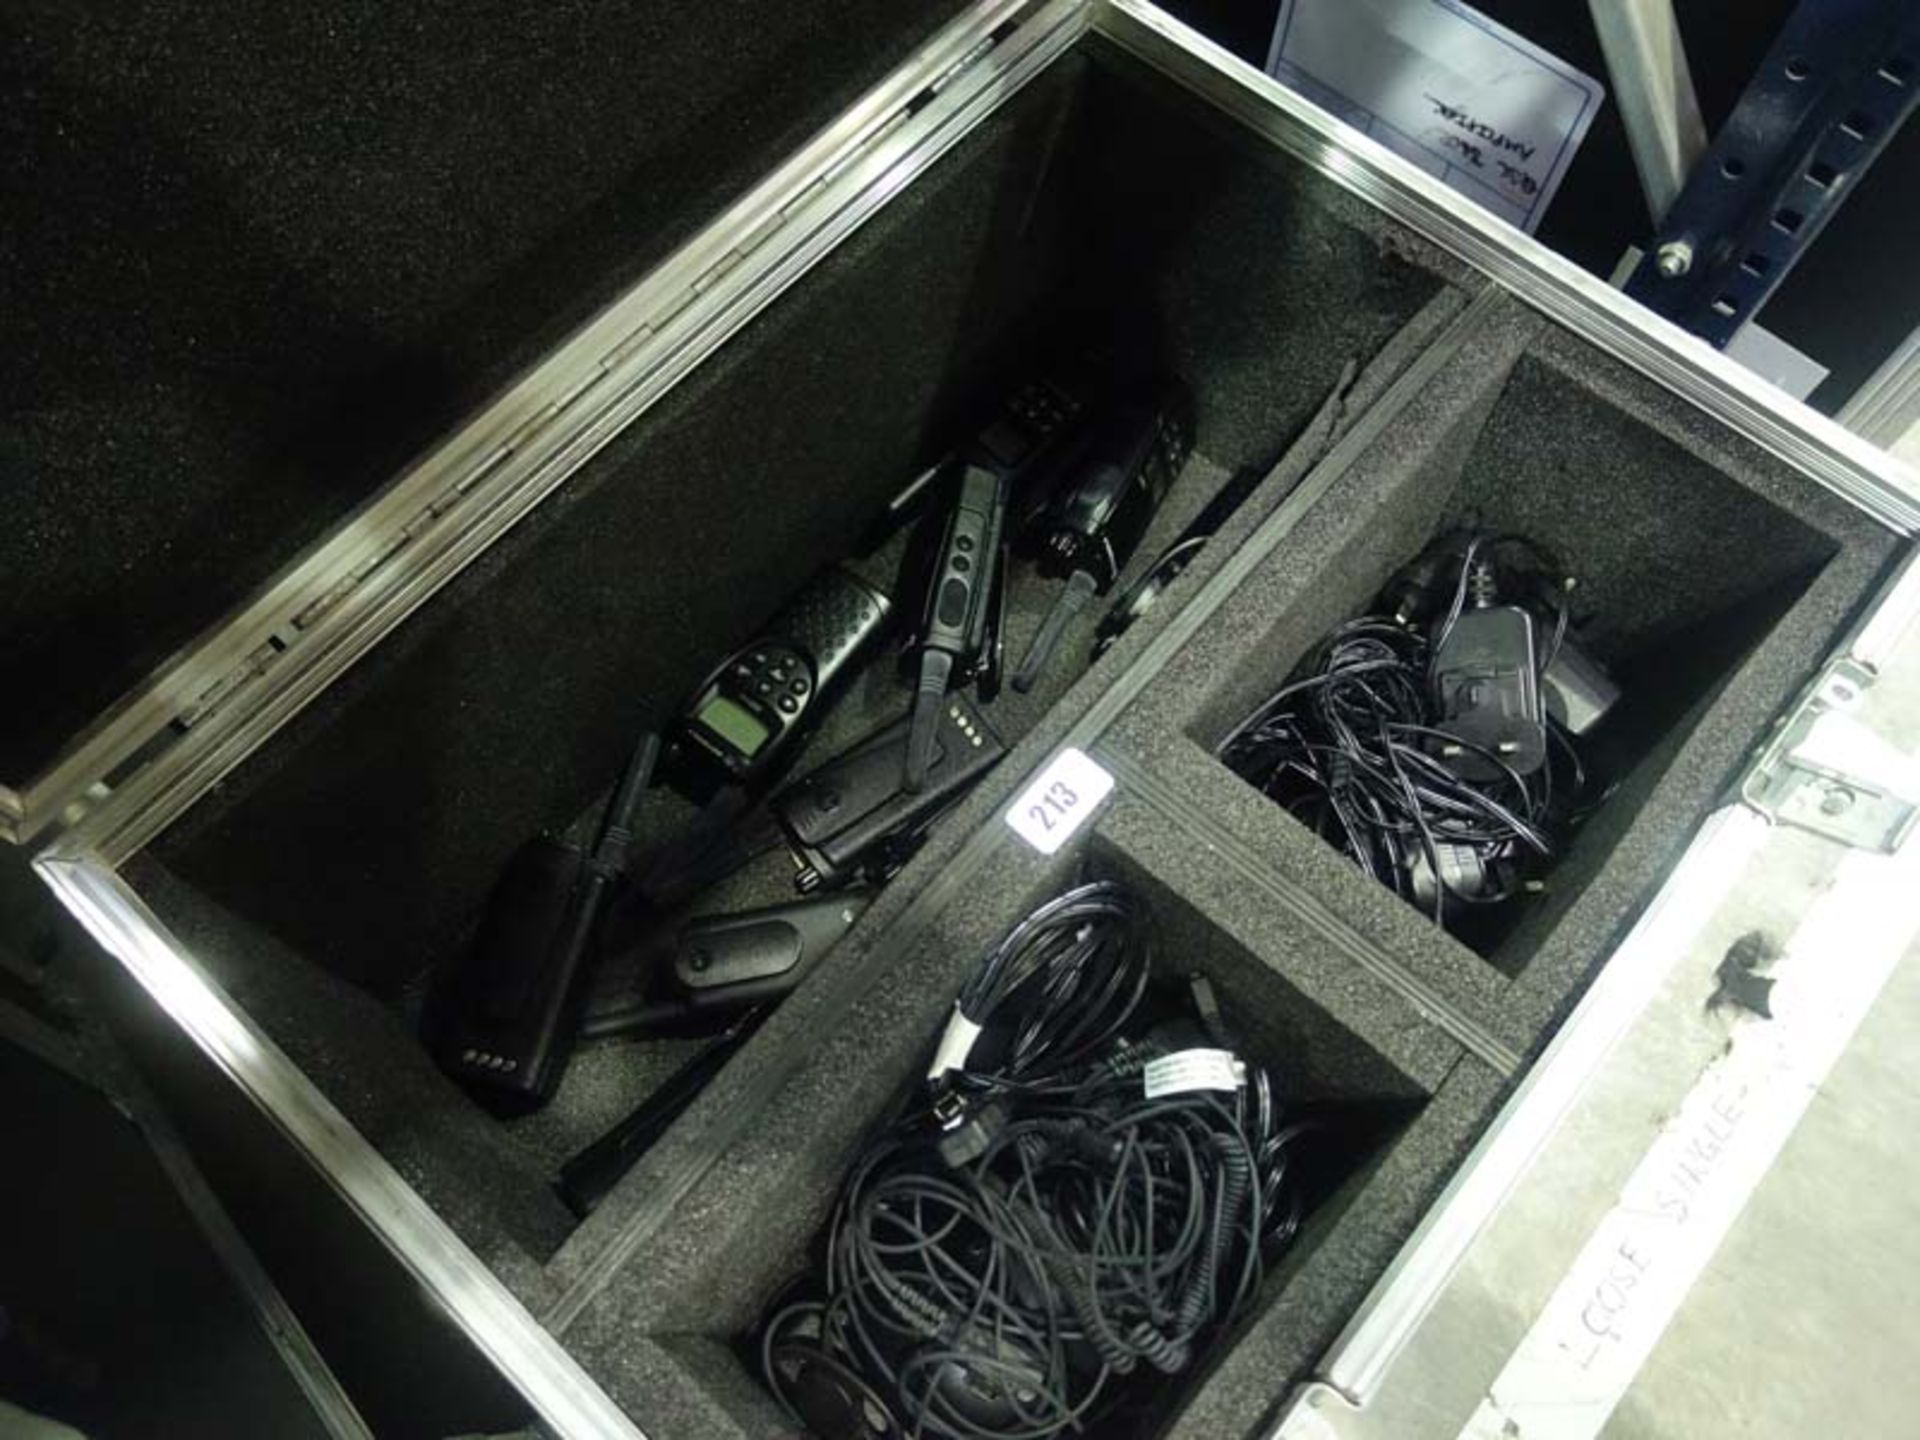 Freight case containing Motorola model XTNID walkie talkies with chargers and earpieces